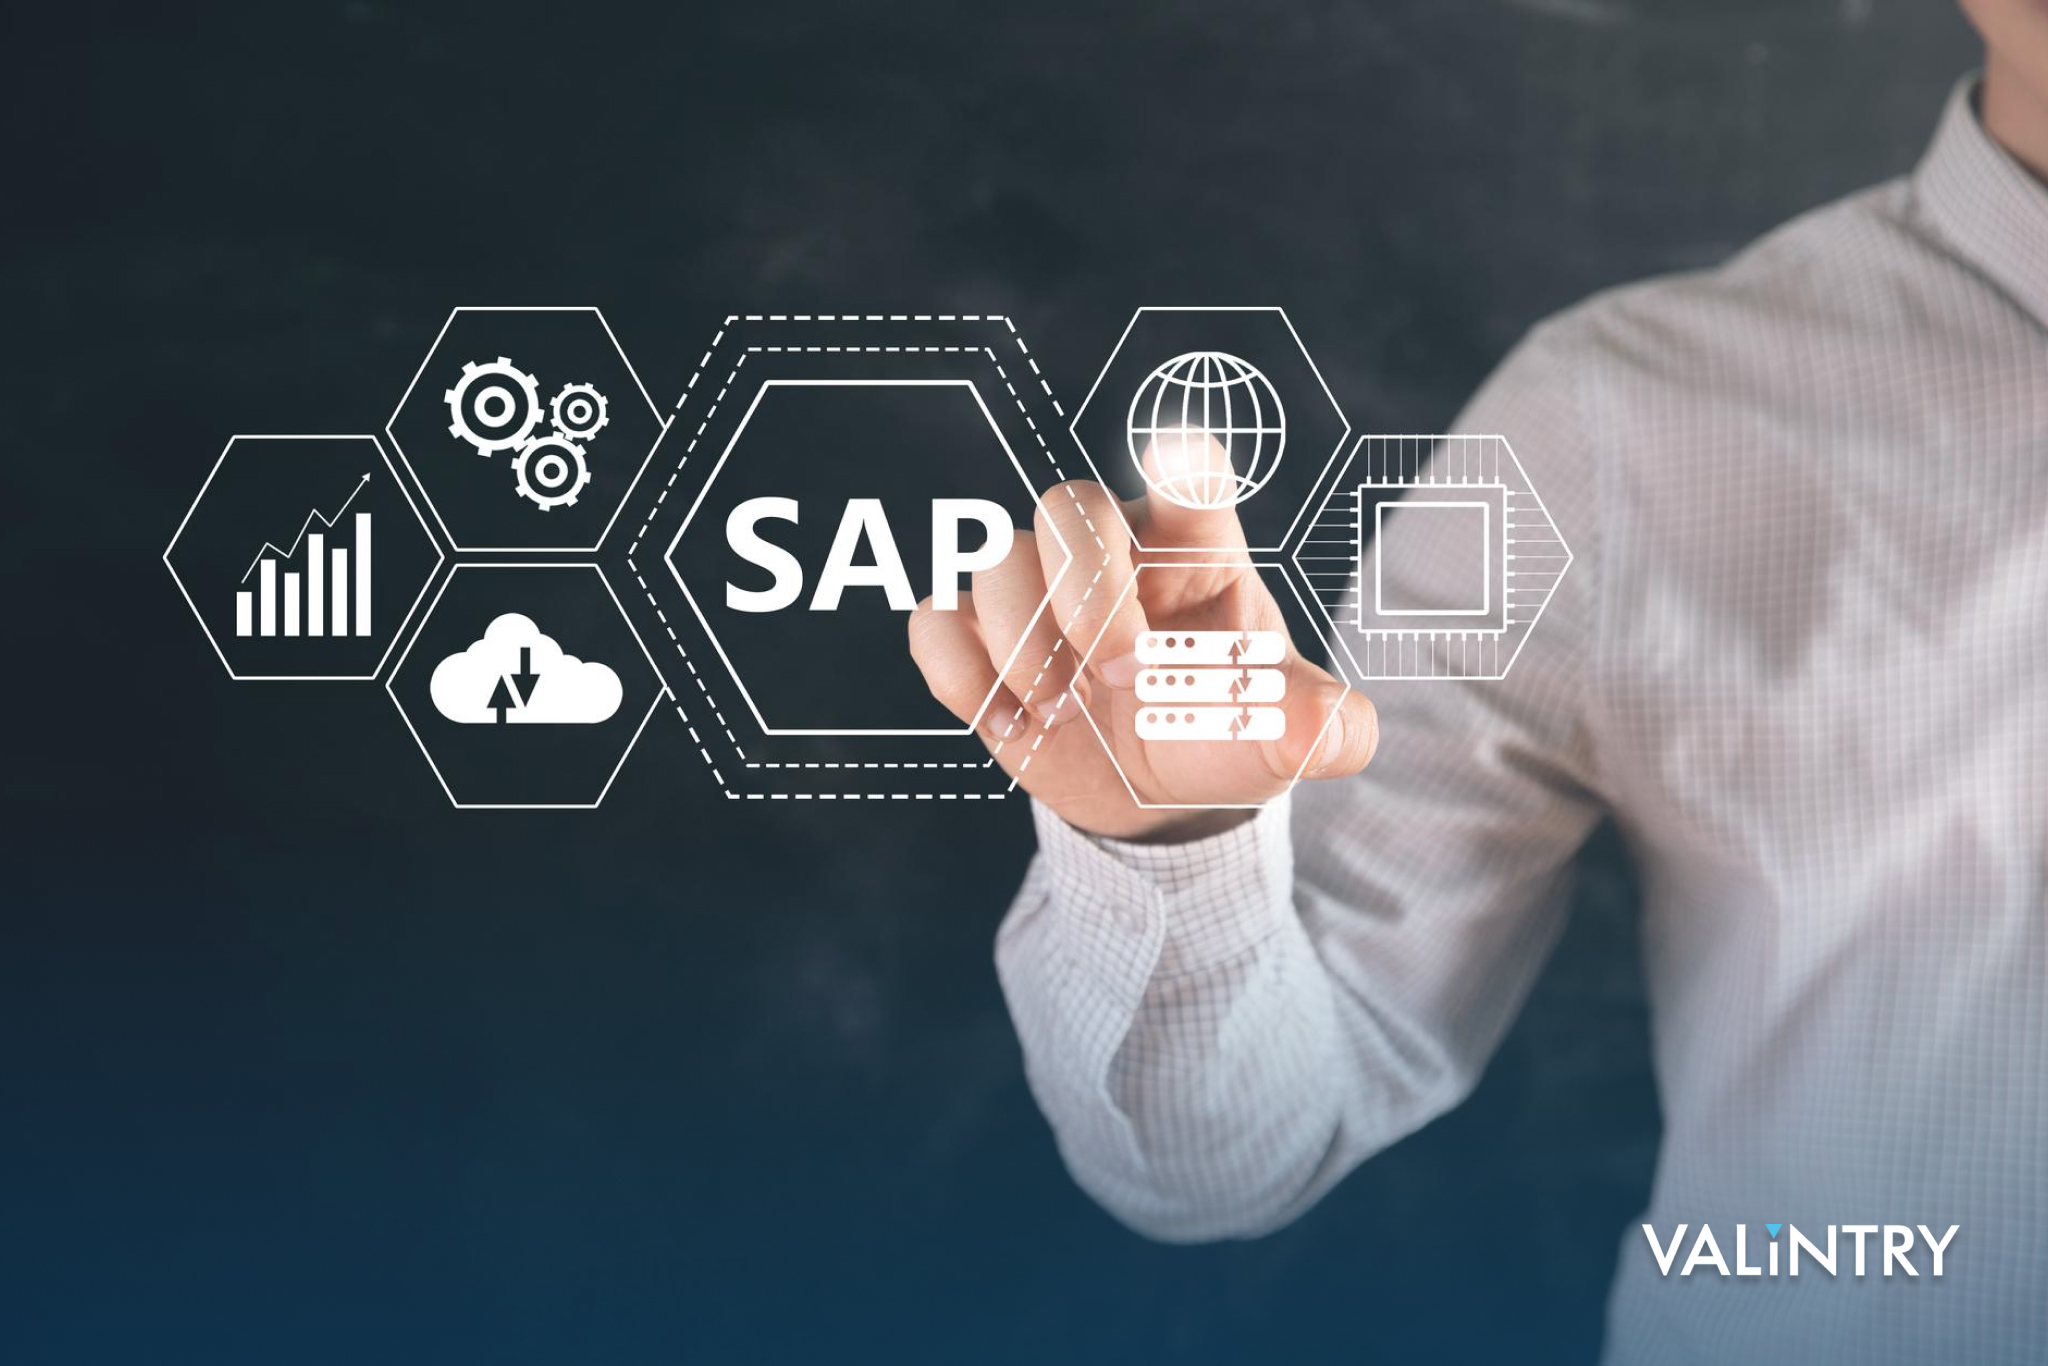 Benefits of VALiNTRY’s SAP Accounting Staffing Services